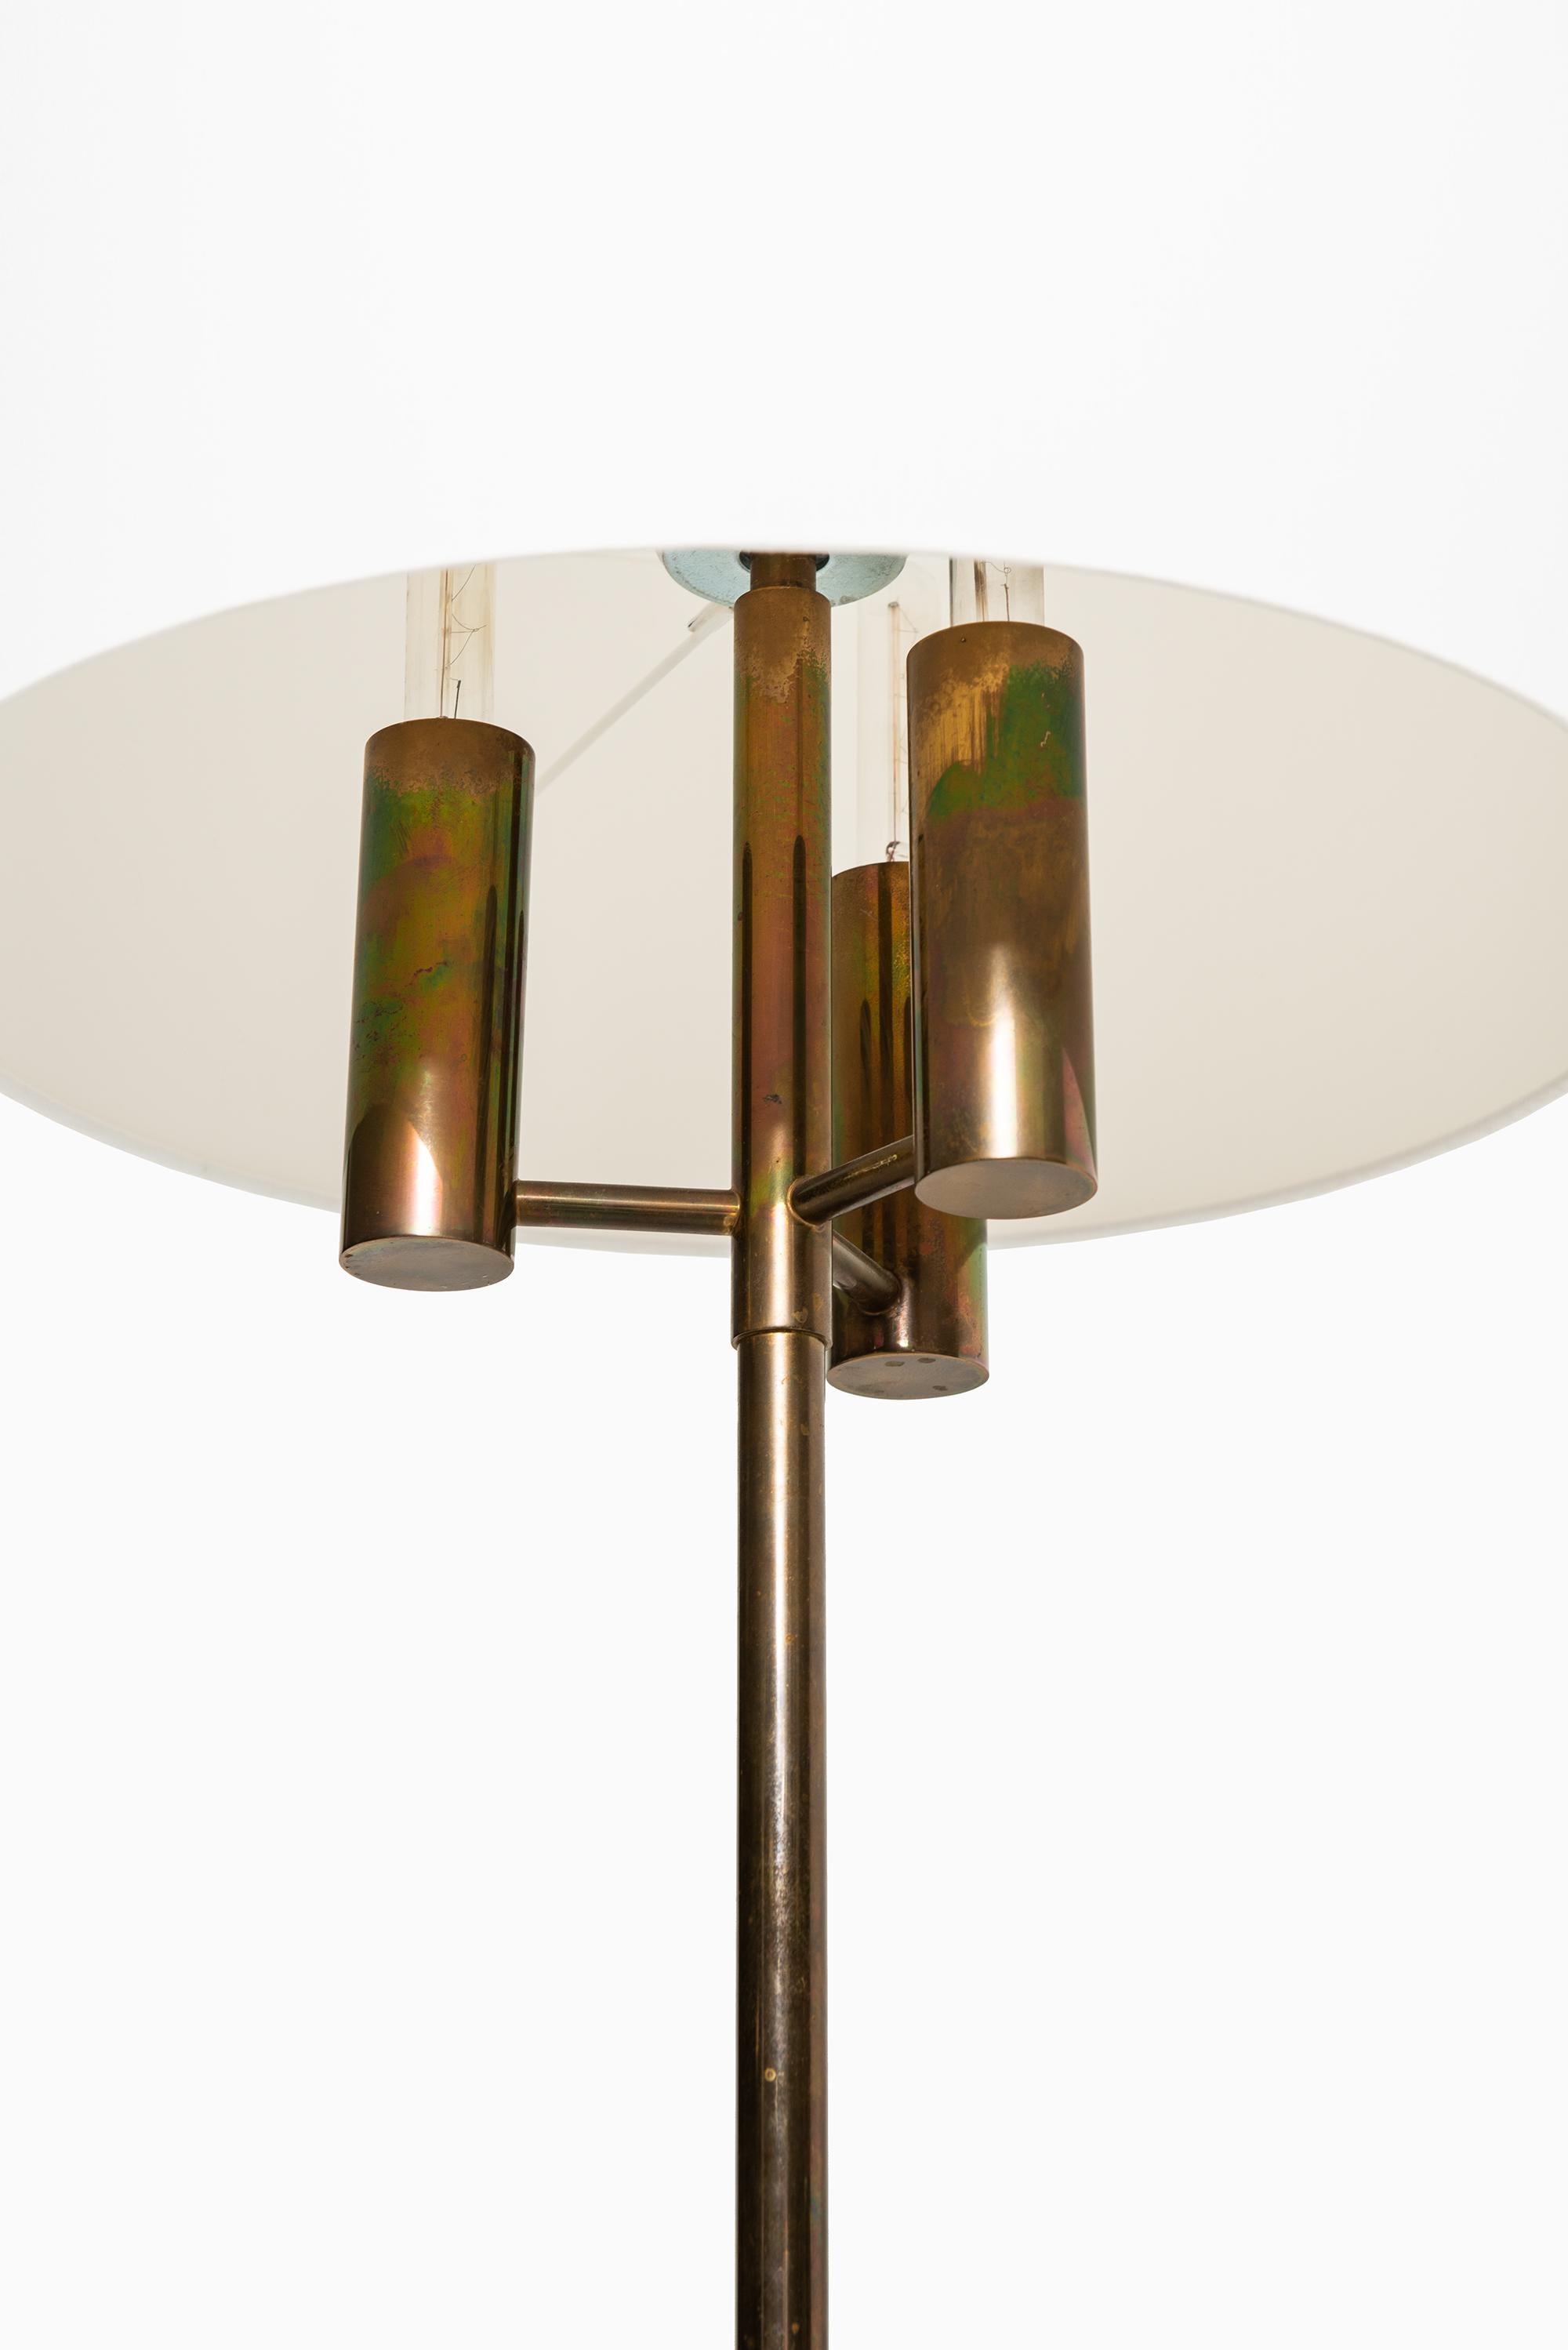 Danish Floor Lamps in the Style of Svend Aage Holm Sørensen Produced in Denmark For Sale